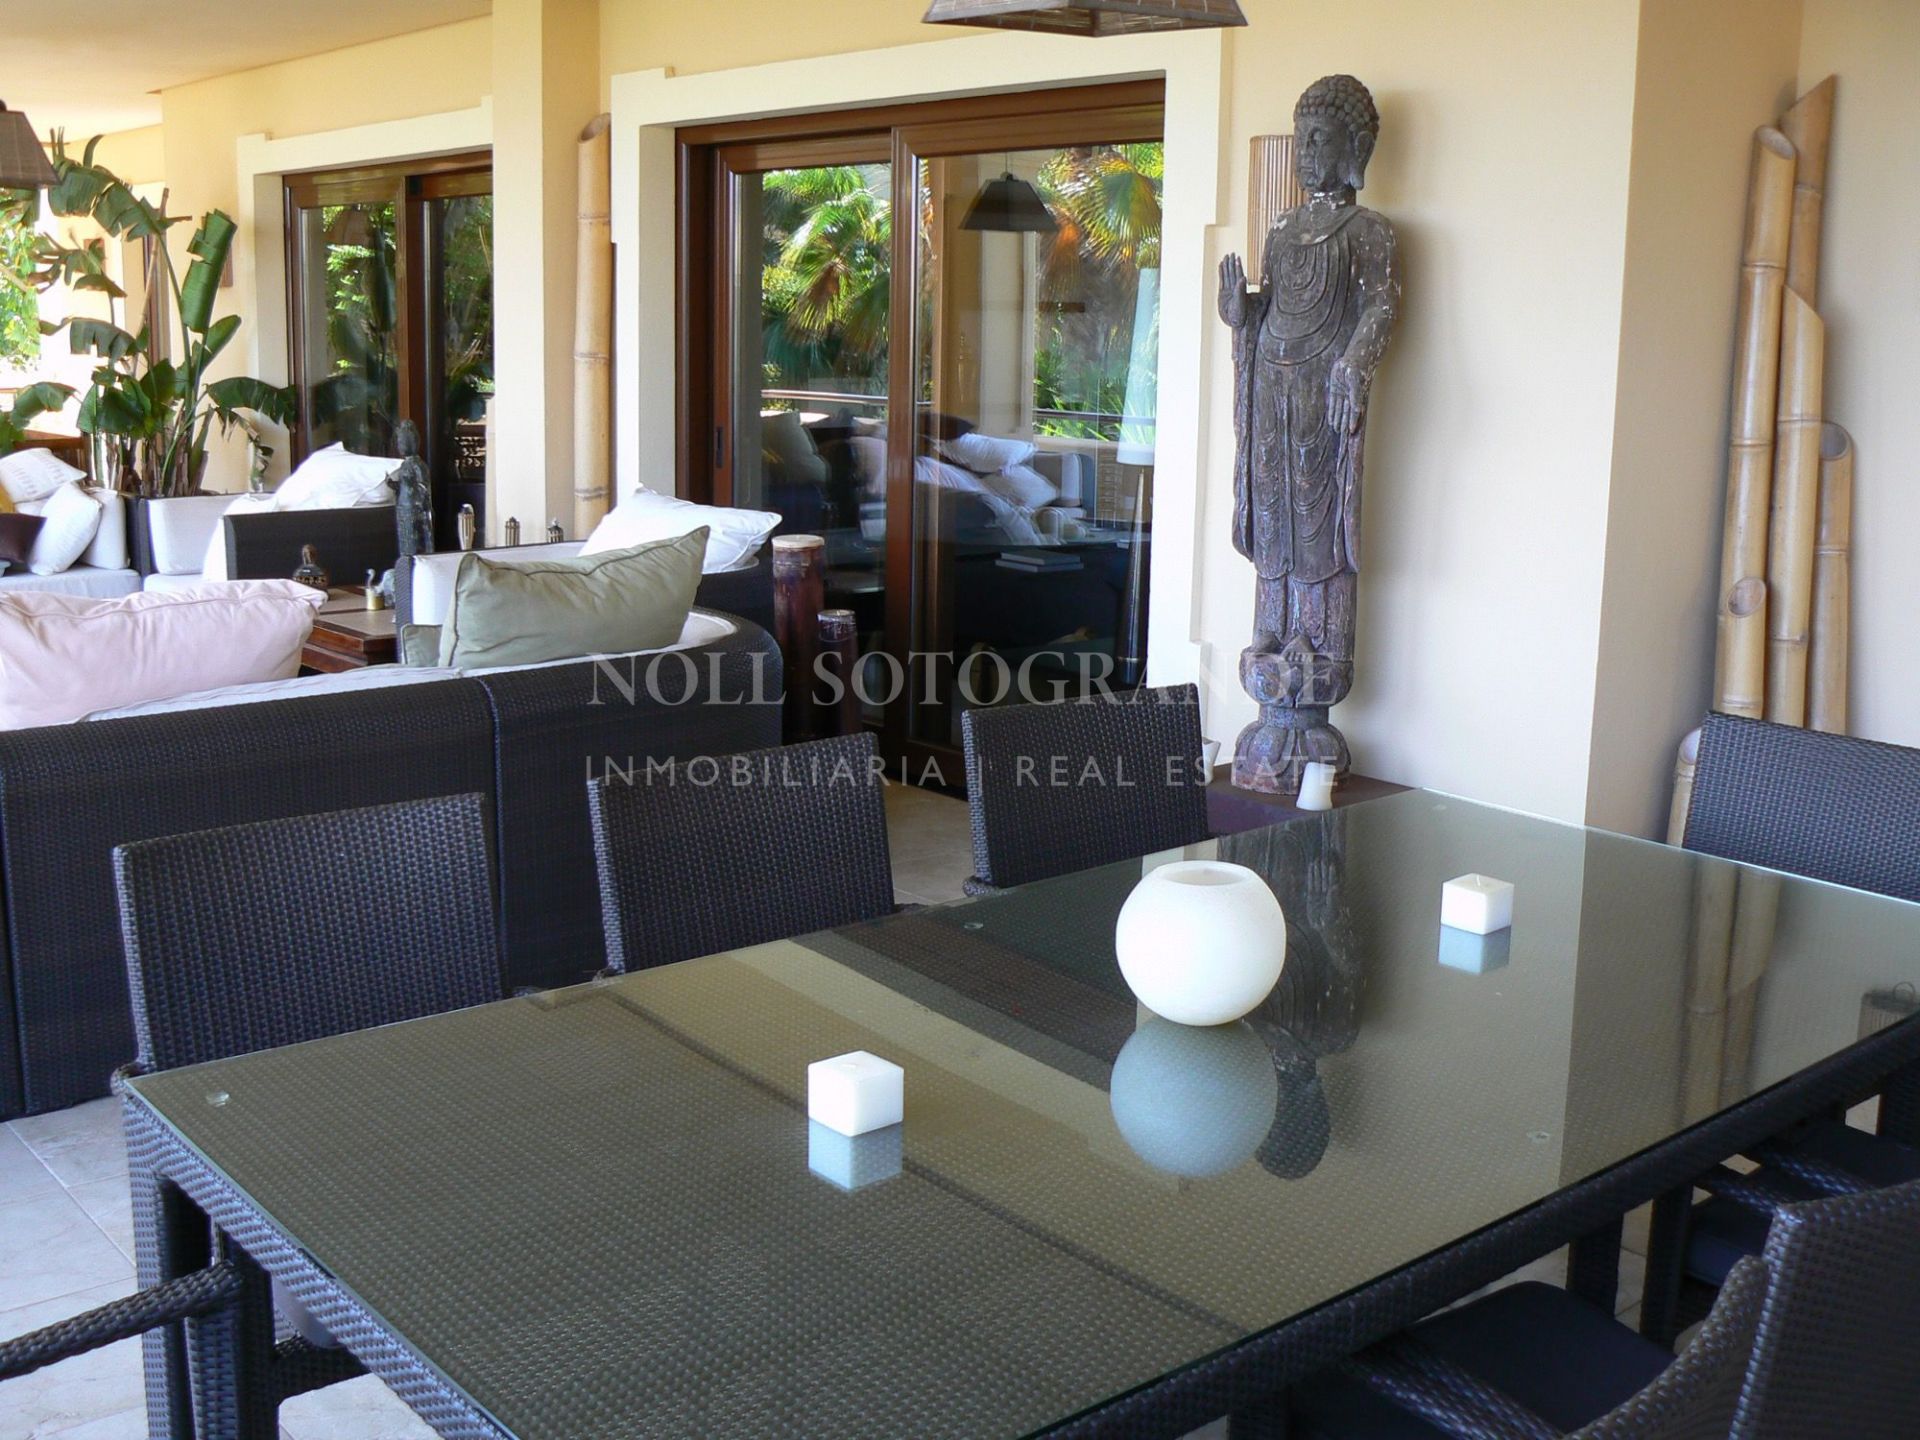 Spacious Apartment in the urbanisation Valgrande, Sotogrande for holiday rental